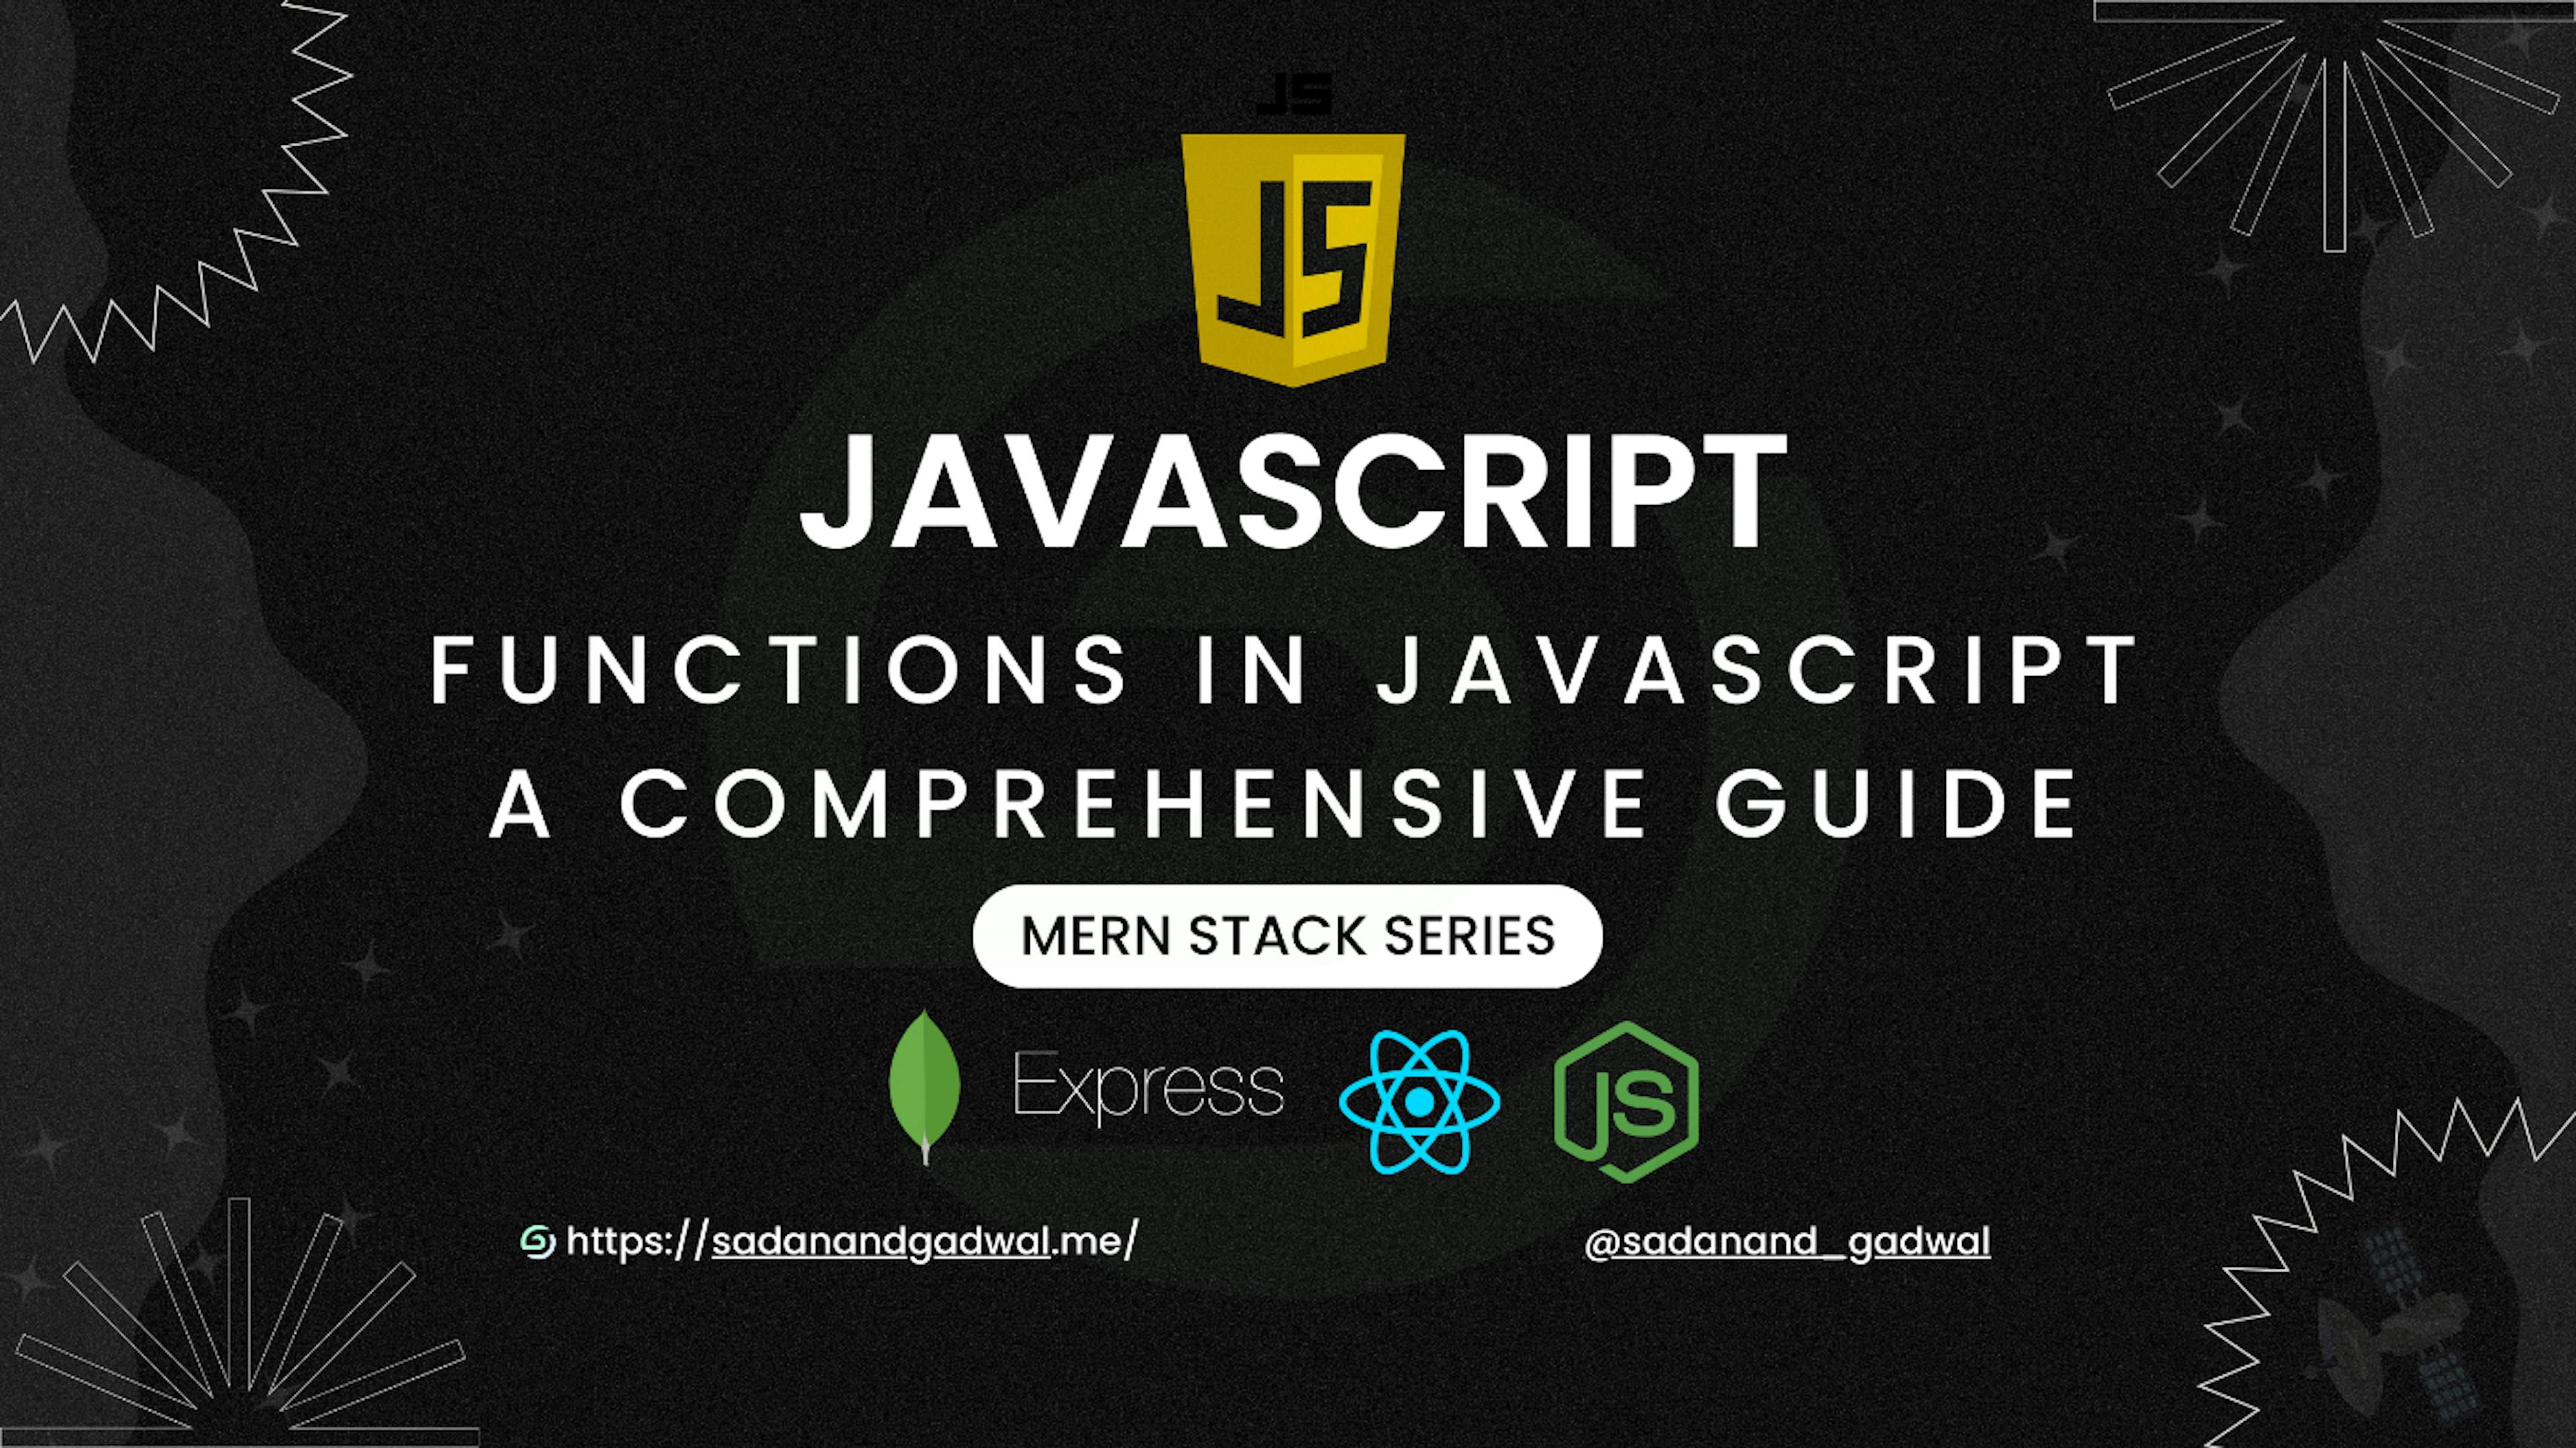 featured image - Getting Started With Functions in JavaScript: Declarations, Parameters, and More